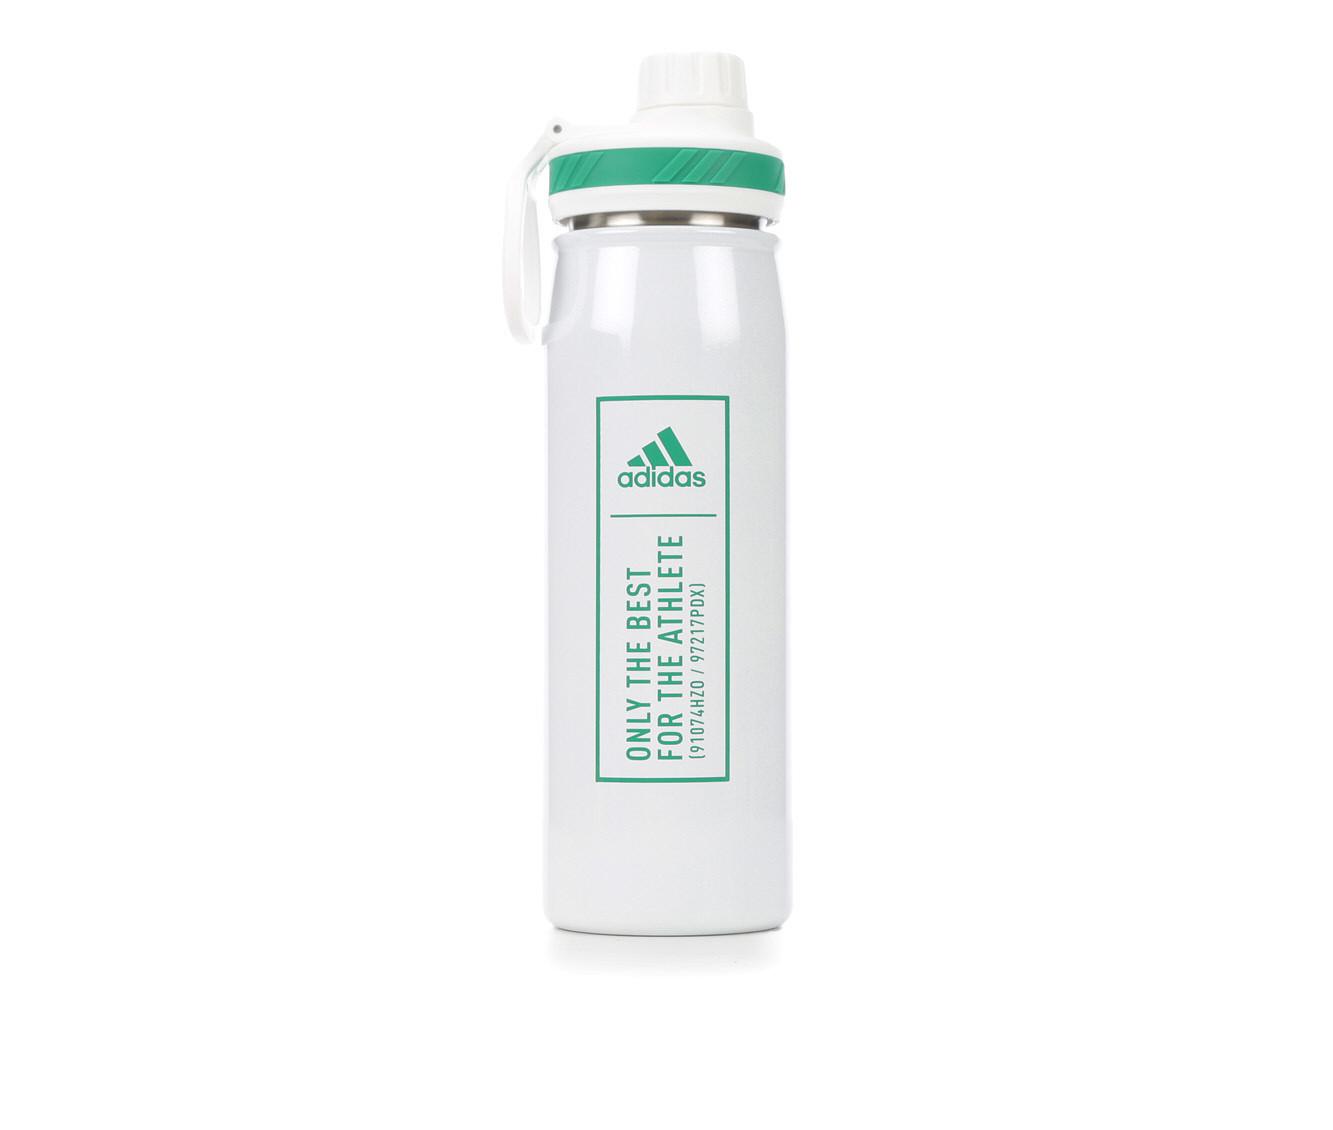 adidas Stainless Steel One Liter Water Bottle for sale online